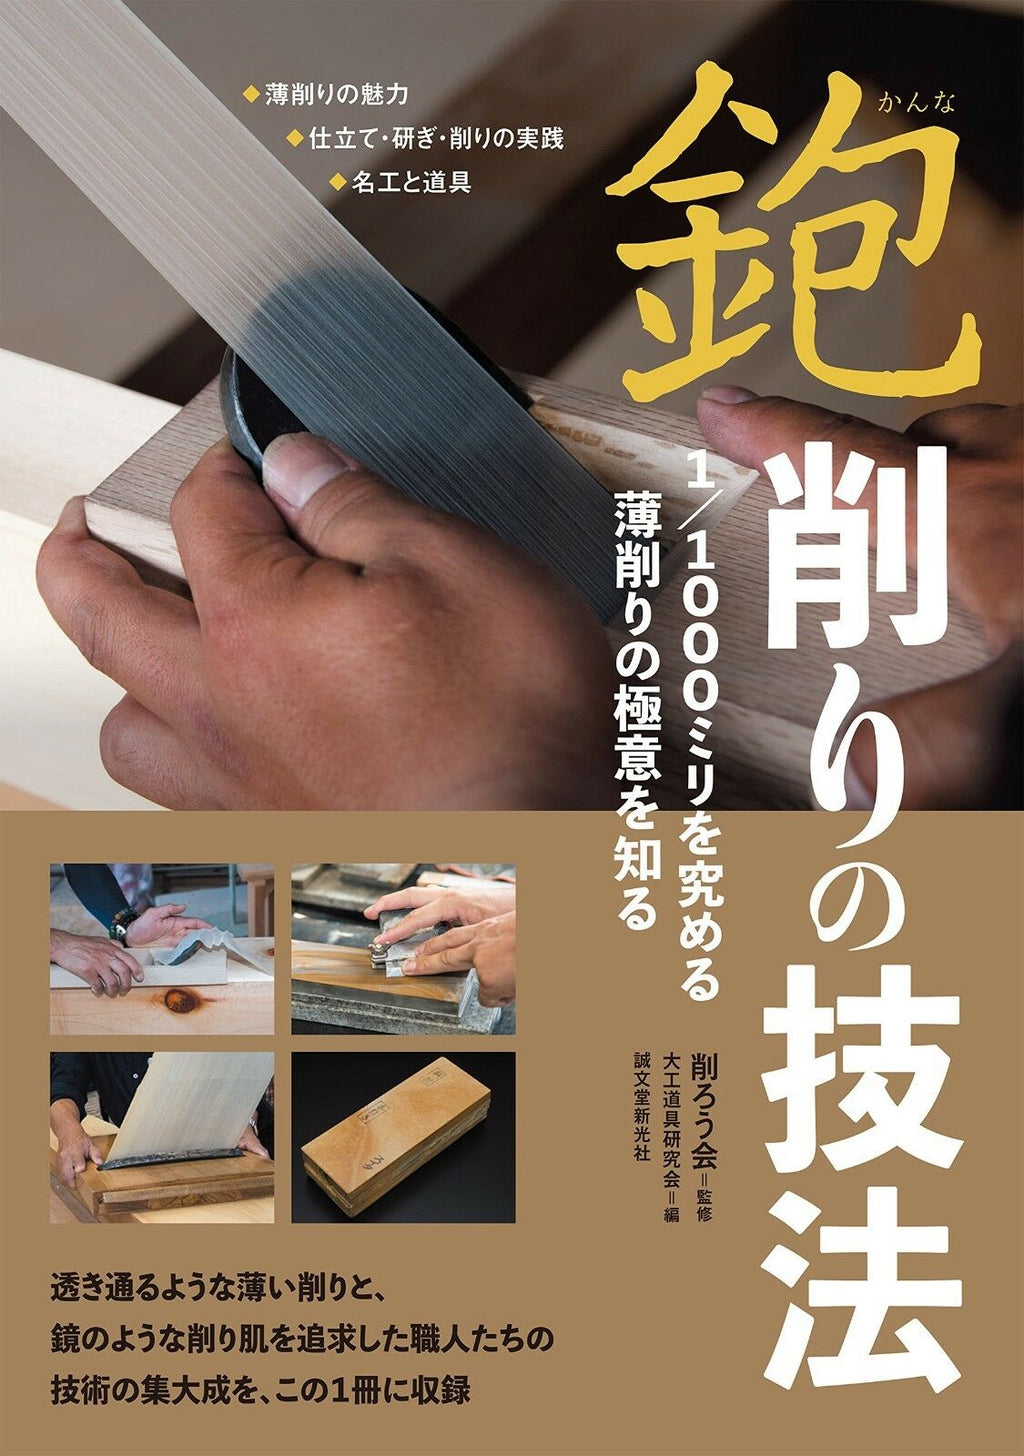 NEW' Japanese Hand Plane Kanna Shave Thin Technique | Carpentry Tools Book Japan